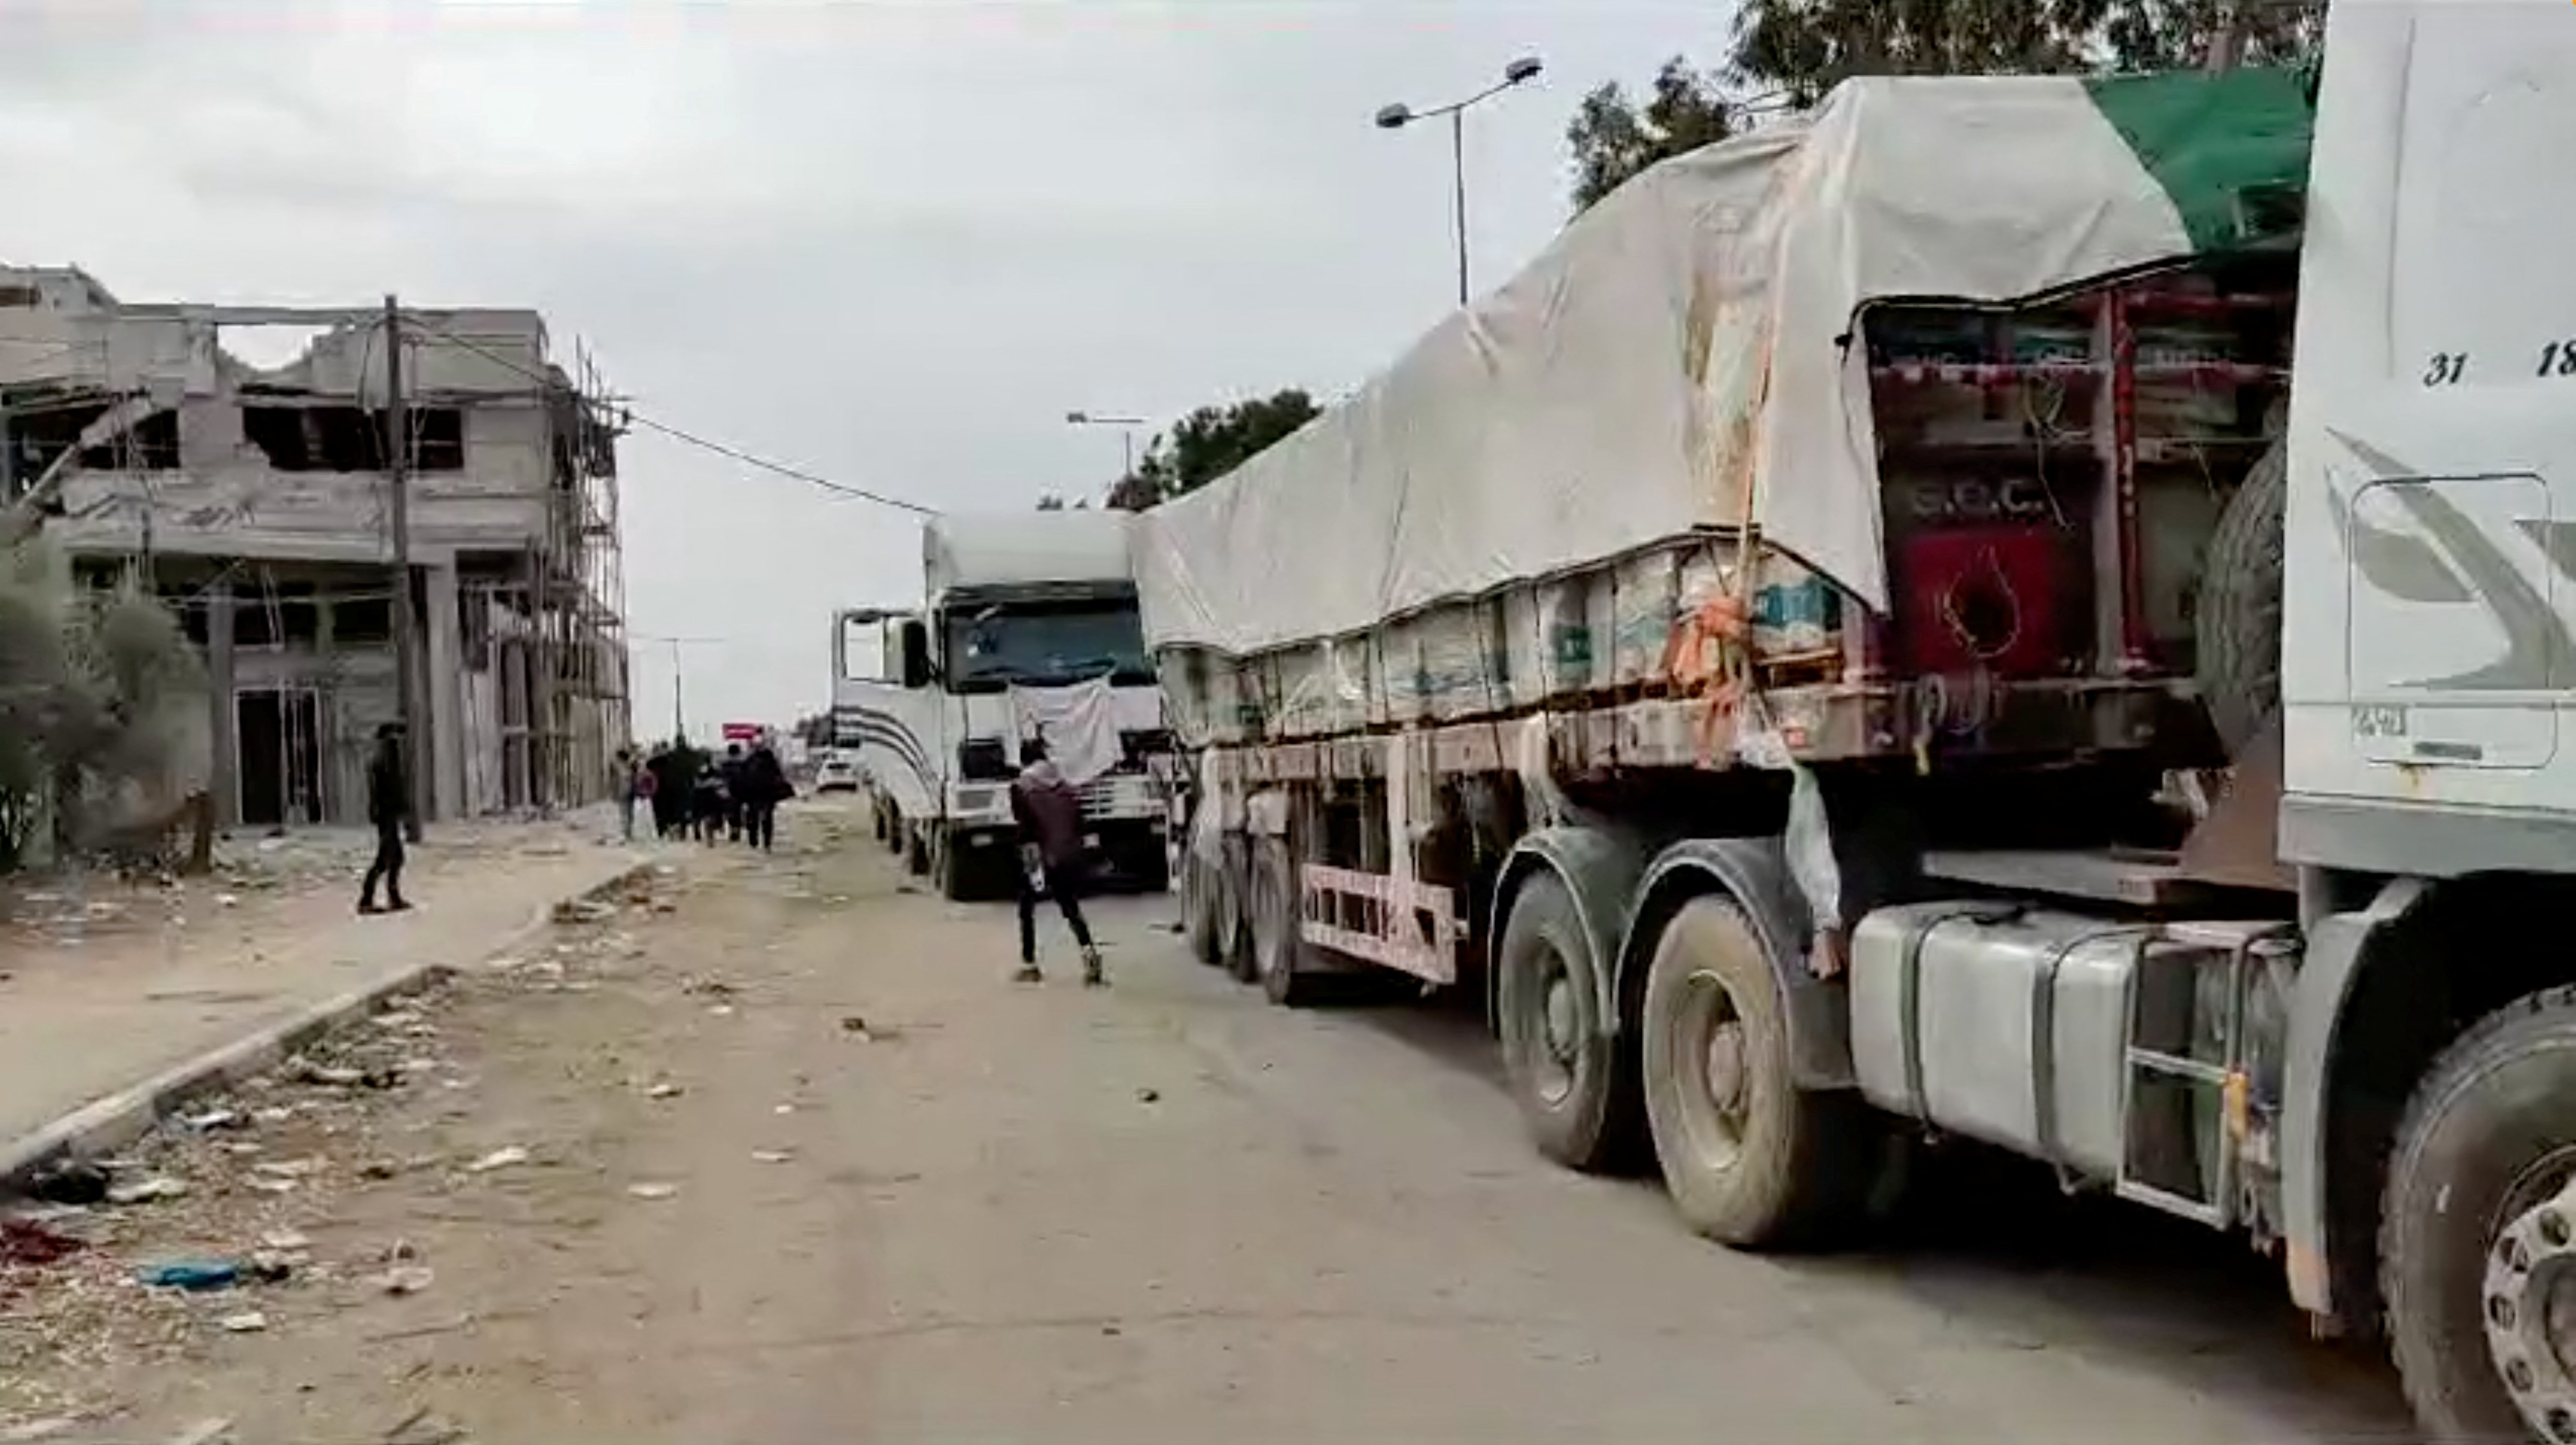 Palestine Red Crescent Society footage shows trucks with aid bound for north Gaza